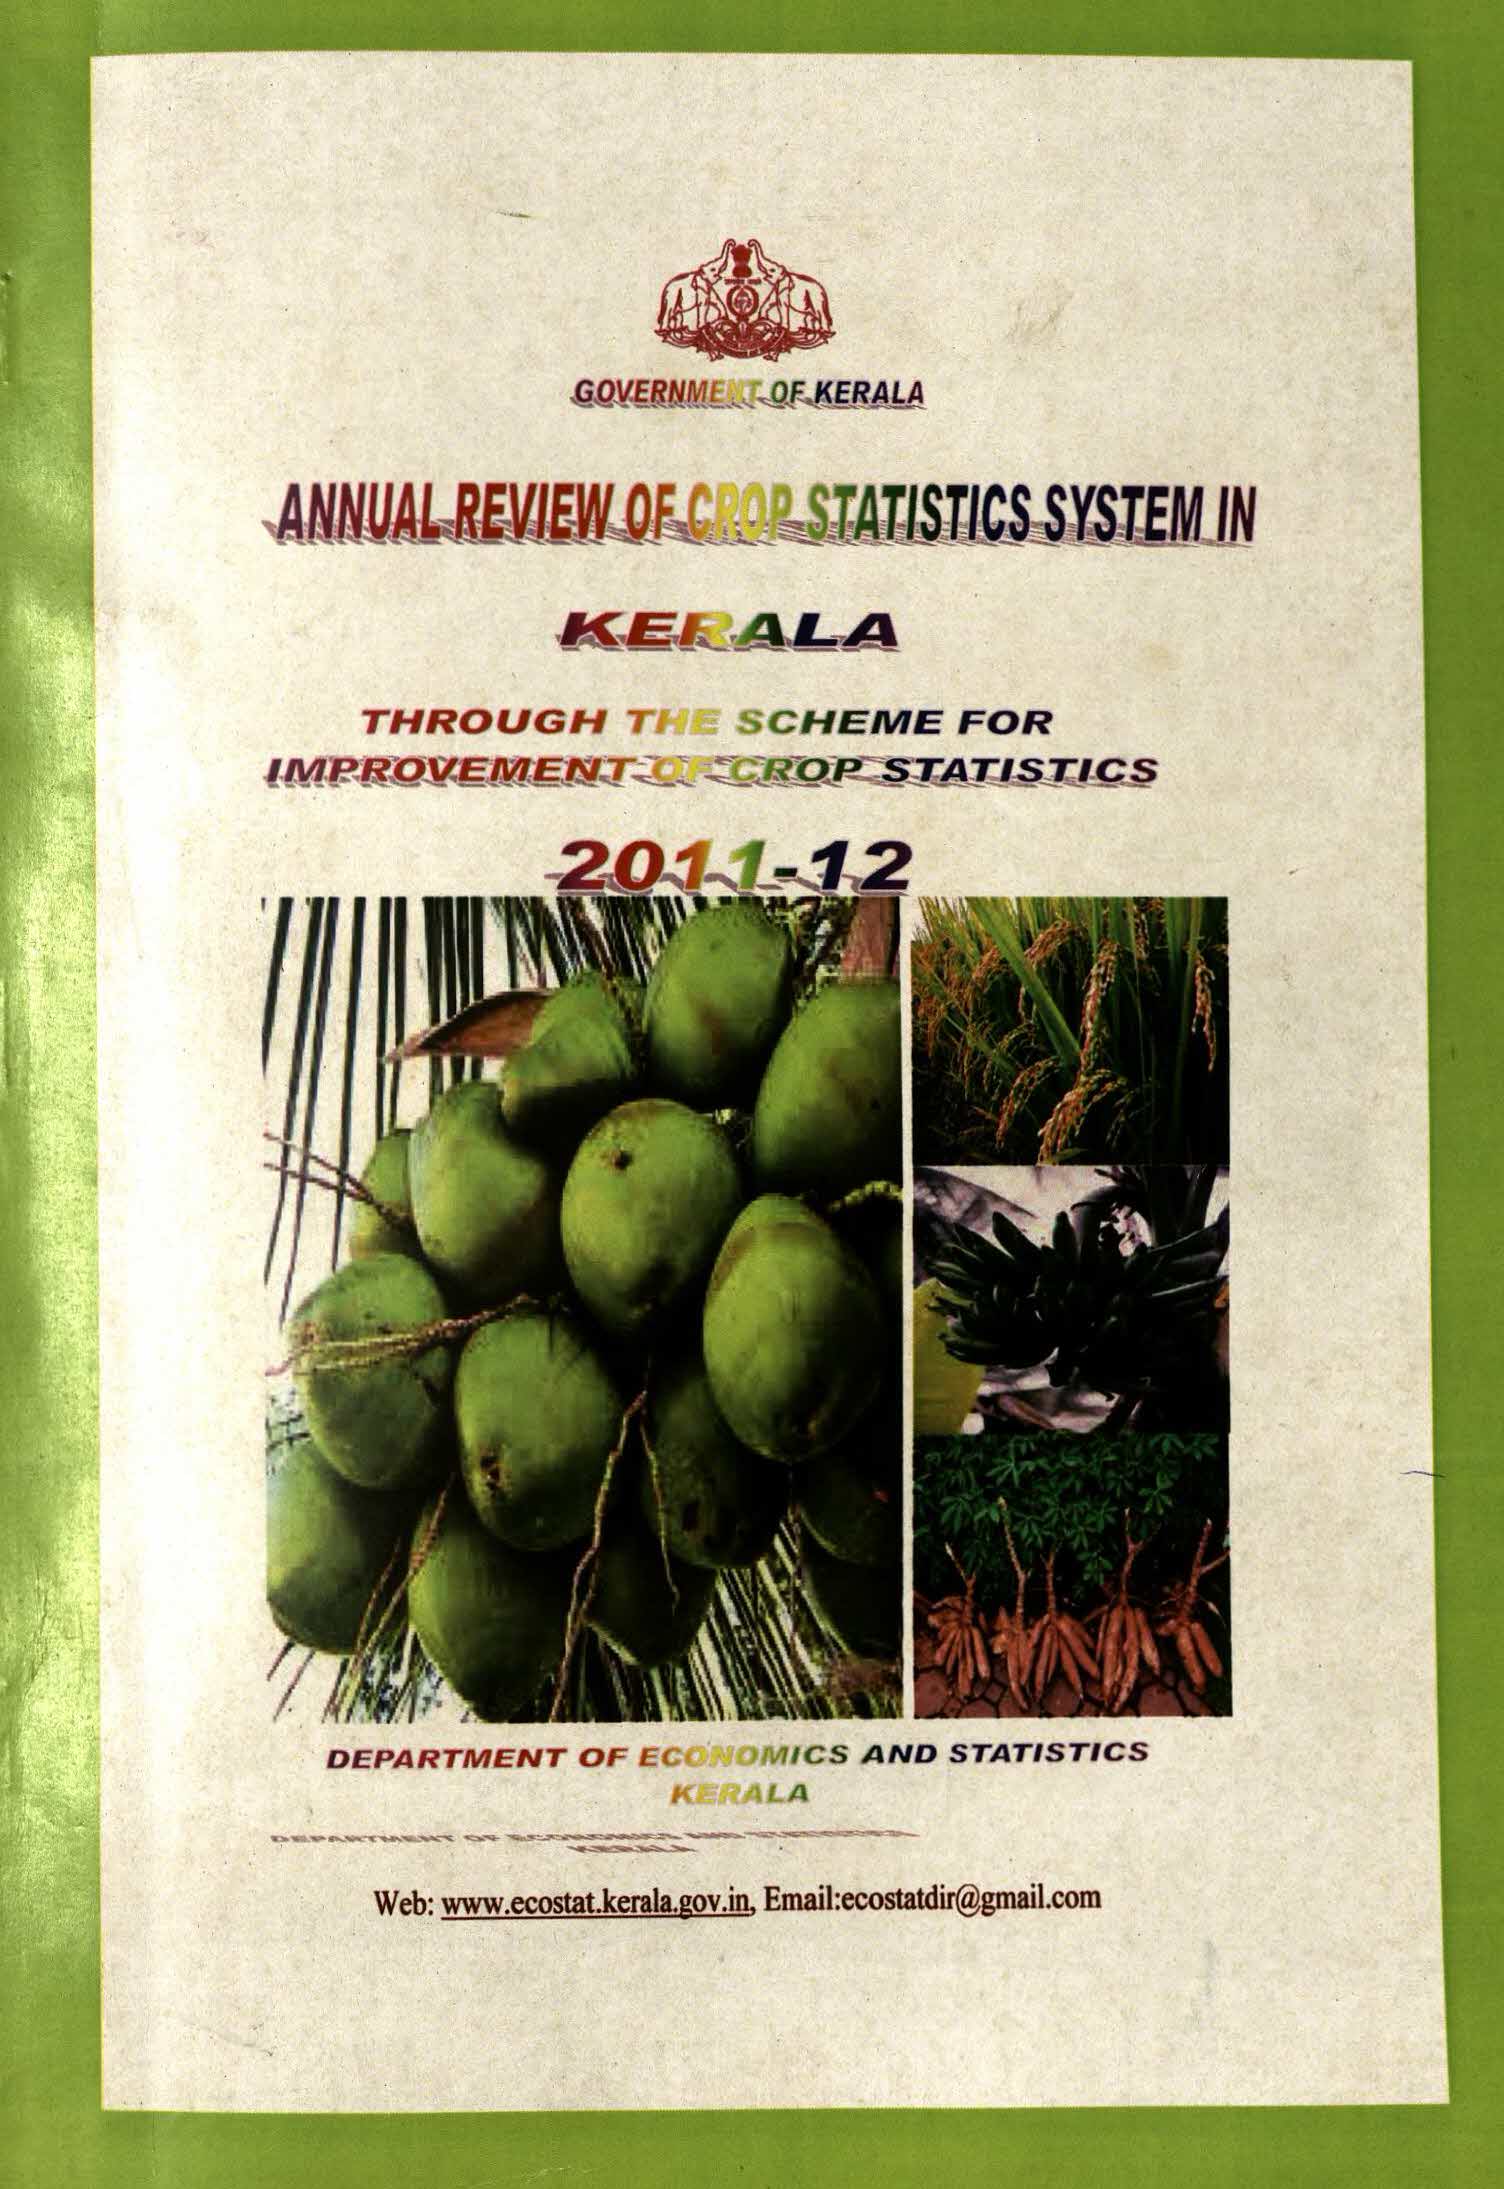 ANNUAL REVIEW OF CROP STATISTICS SYSTEM IN KERALA 2011-12